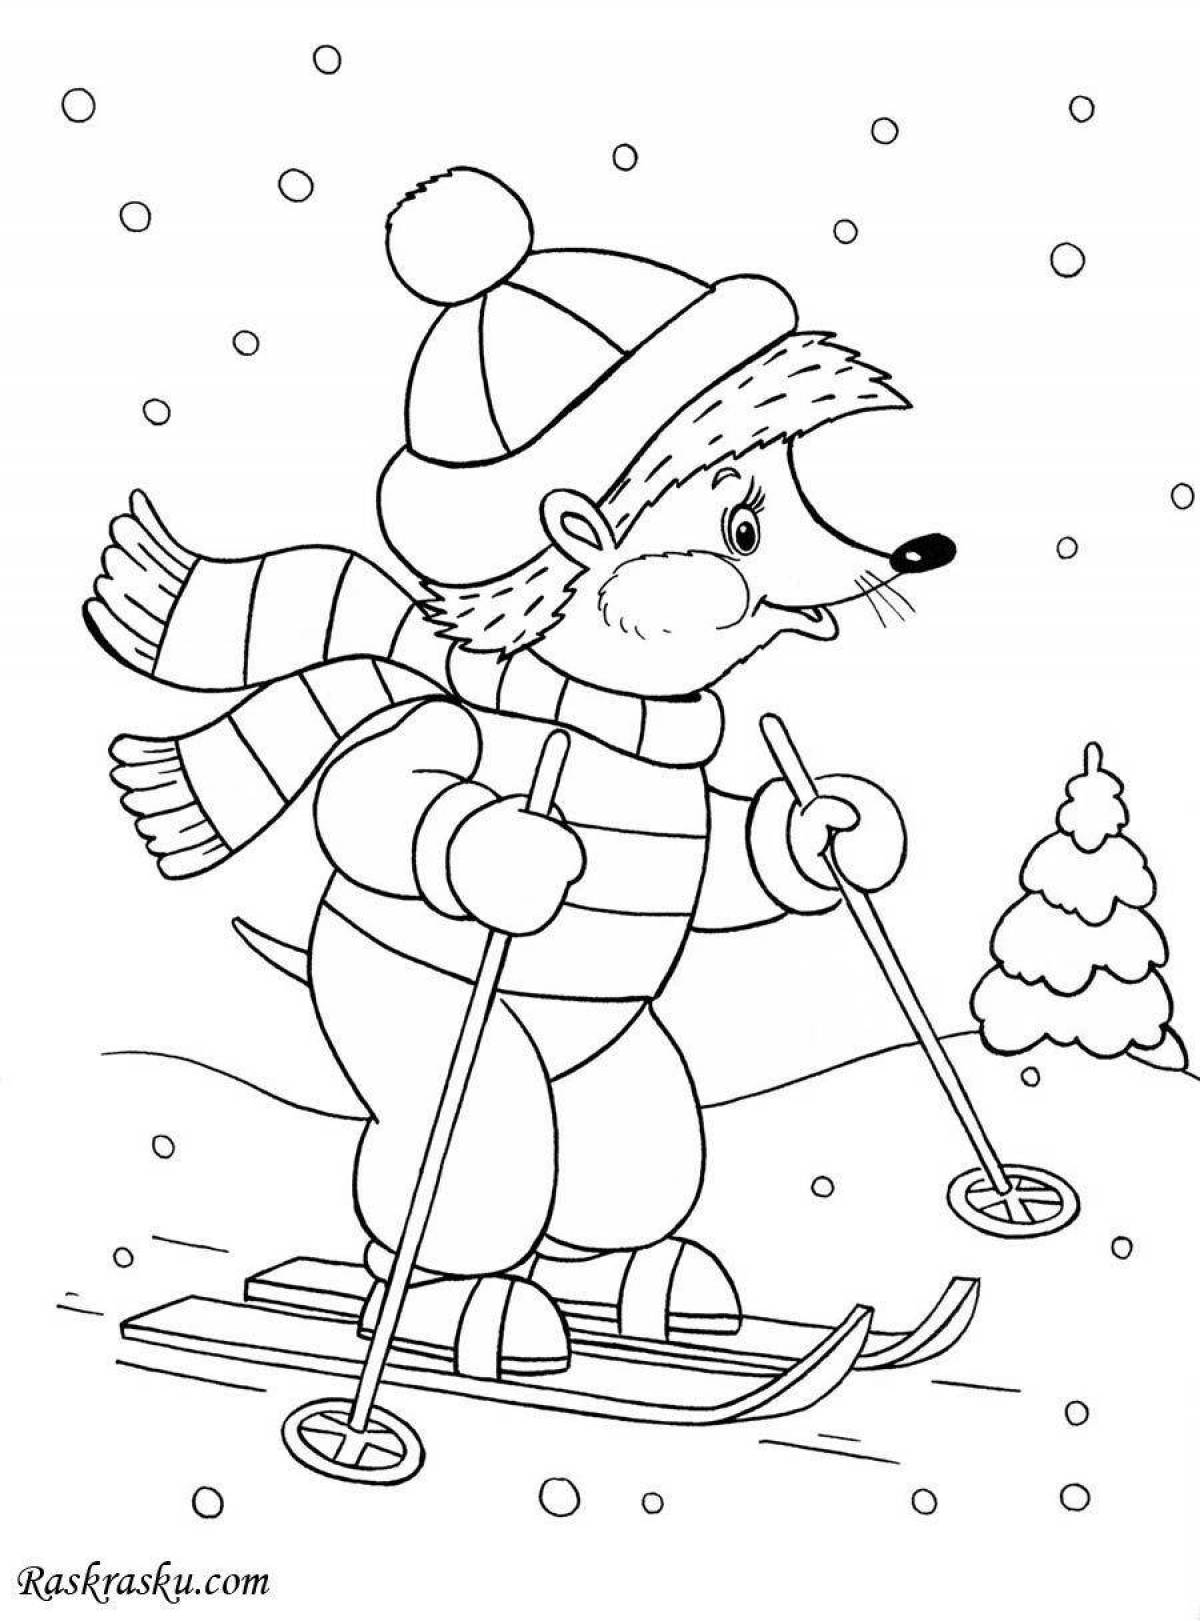 Playful winter coloring book for children 4-6 years old